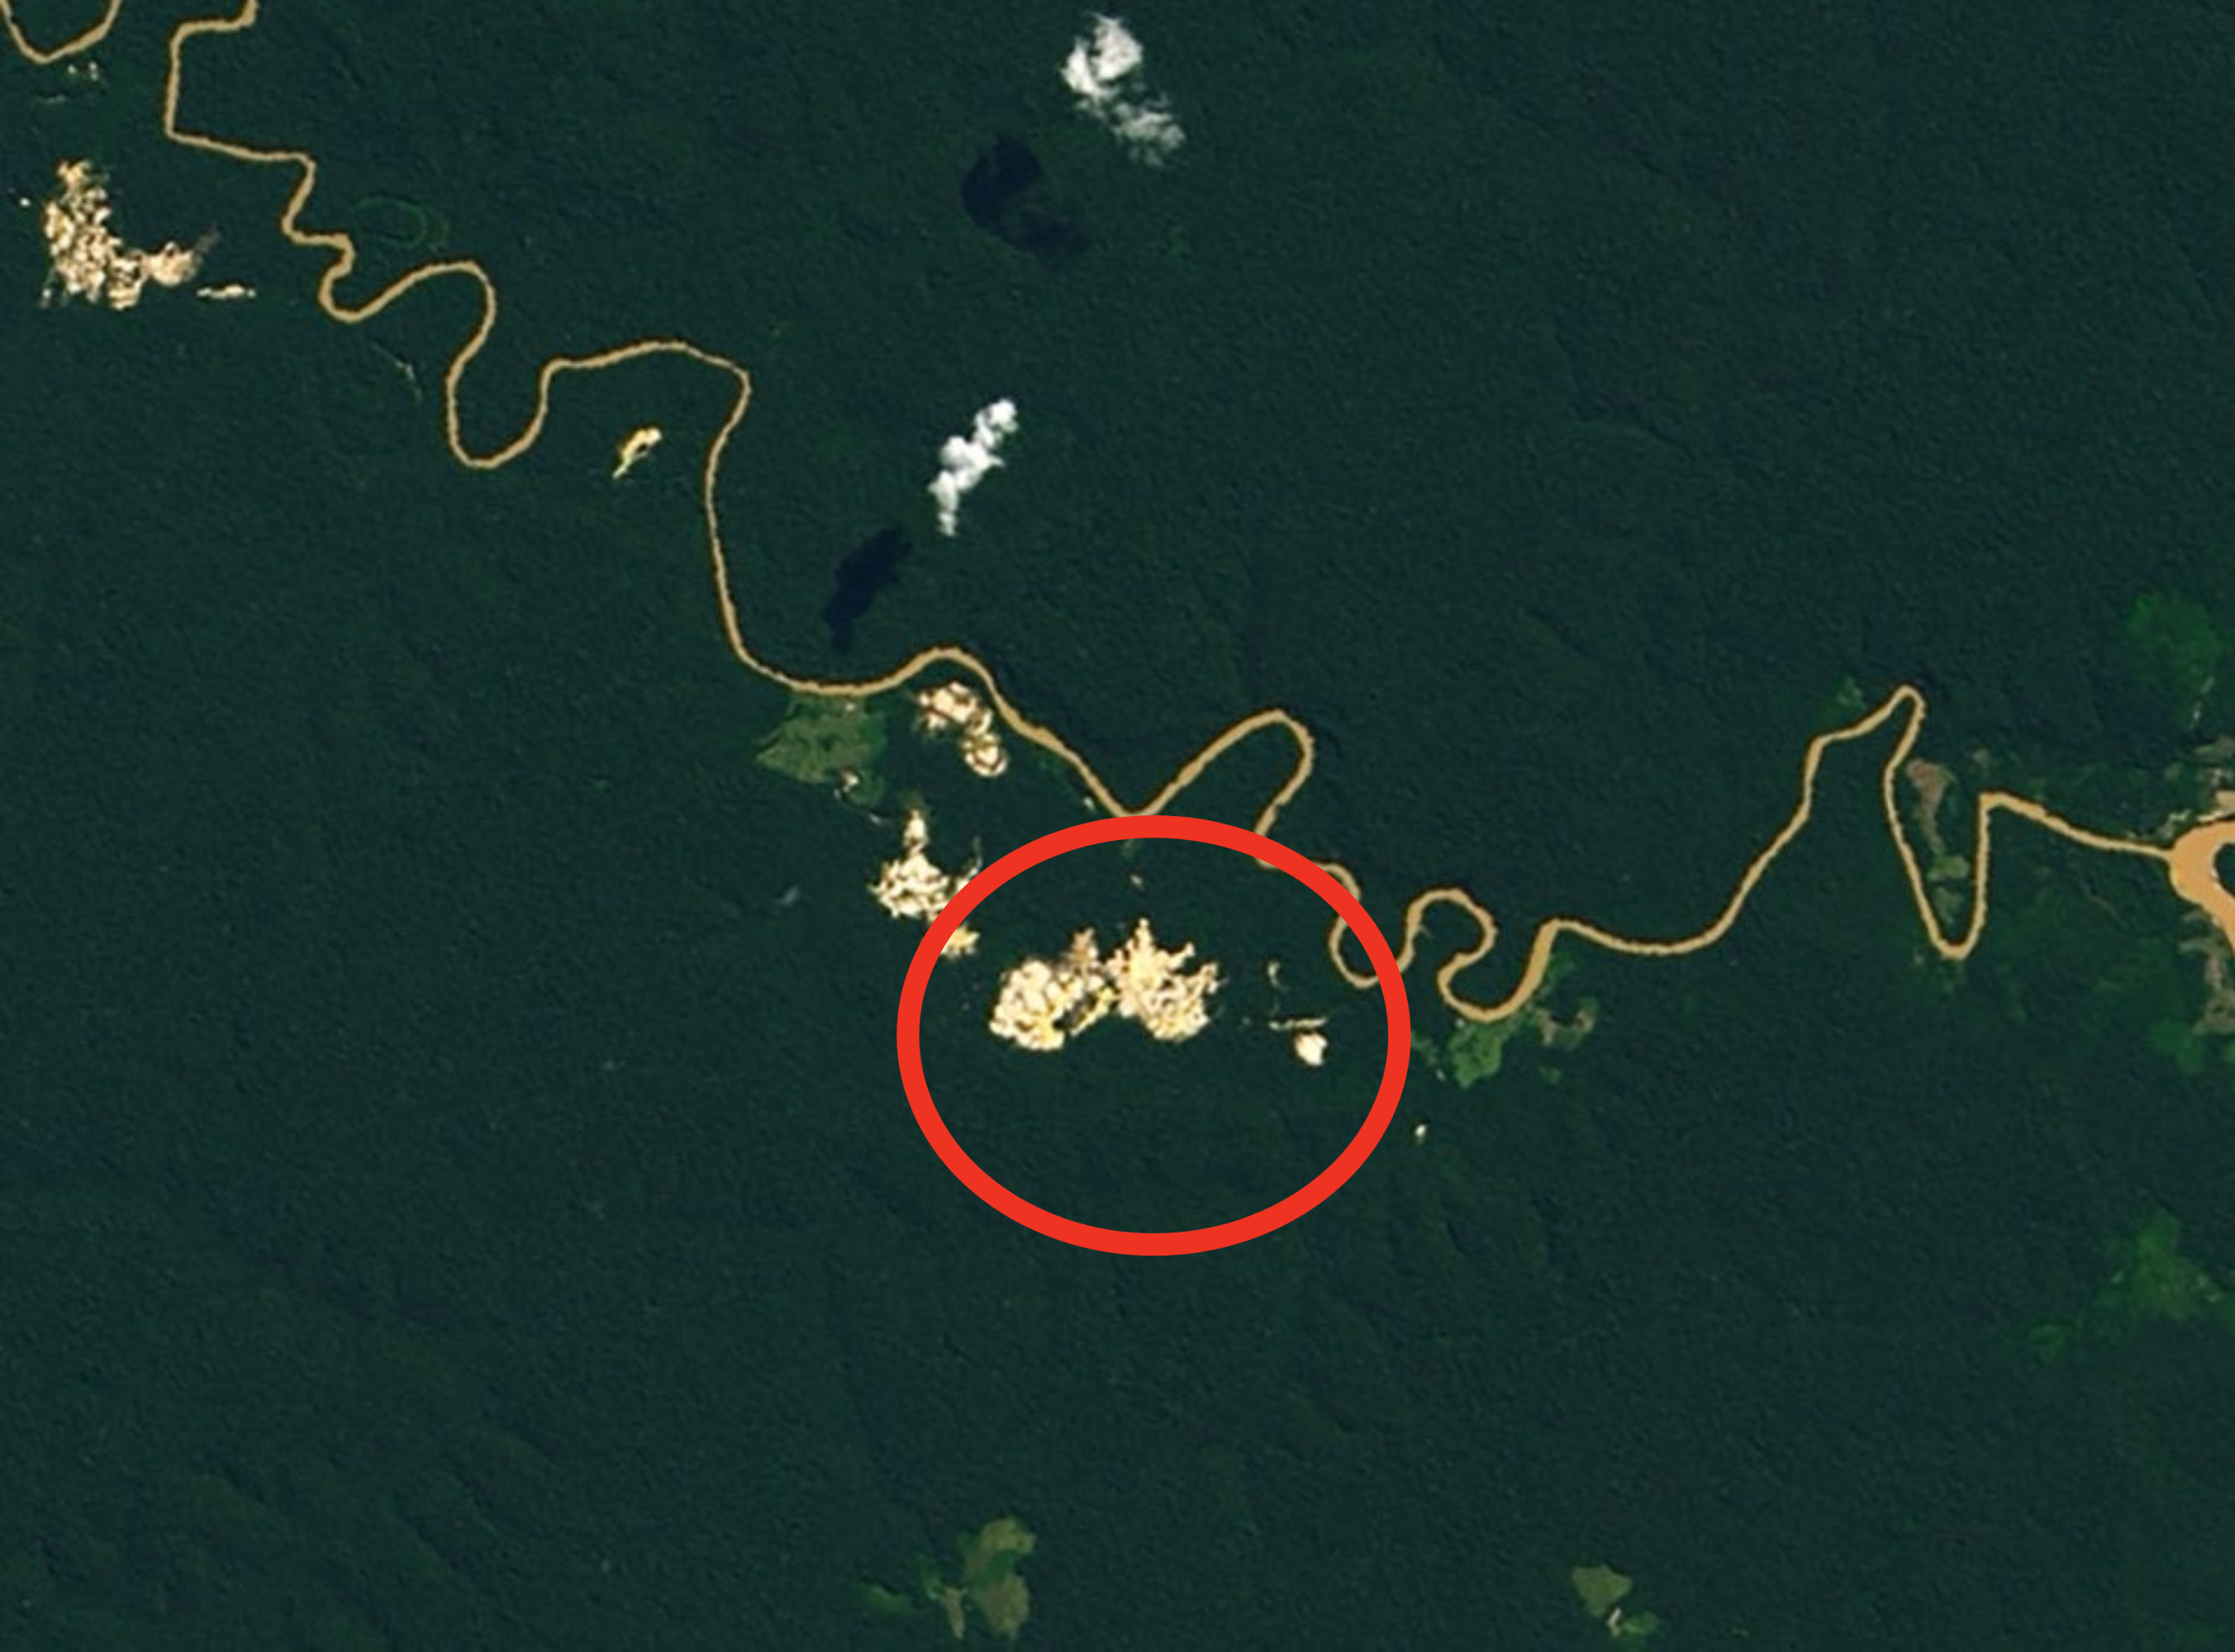 A satellite image of a gold mining operation expanding over the years